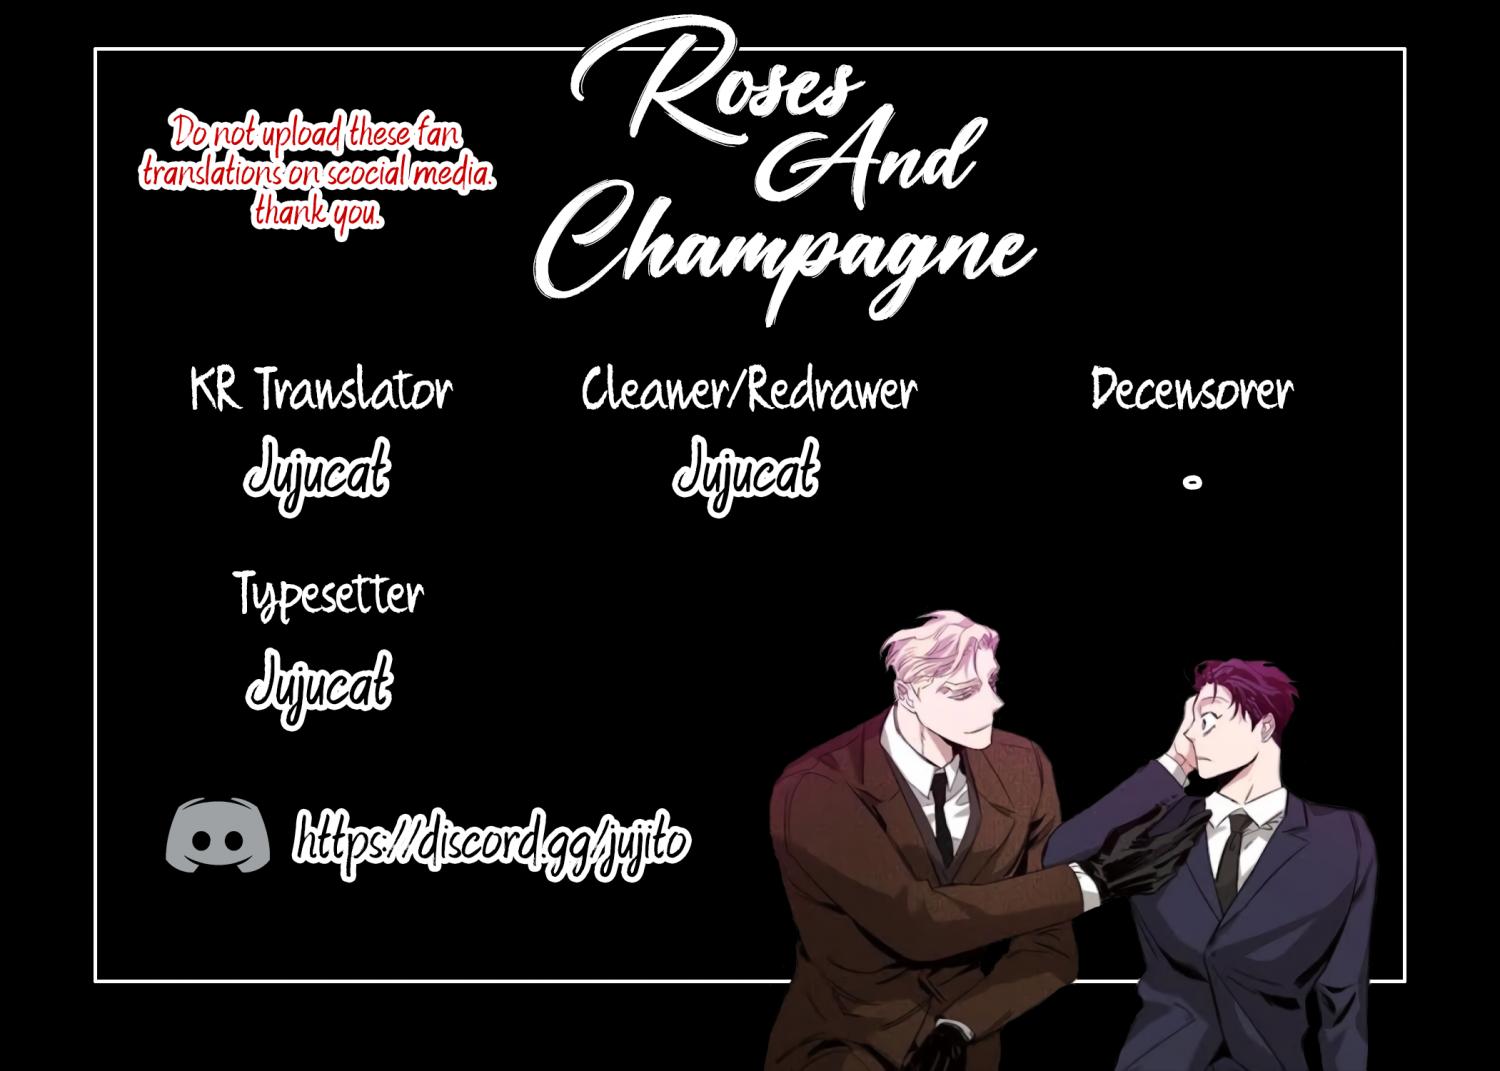 Roses And Champagne - Page 2